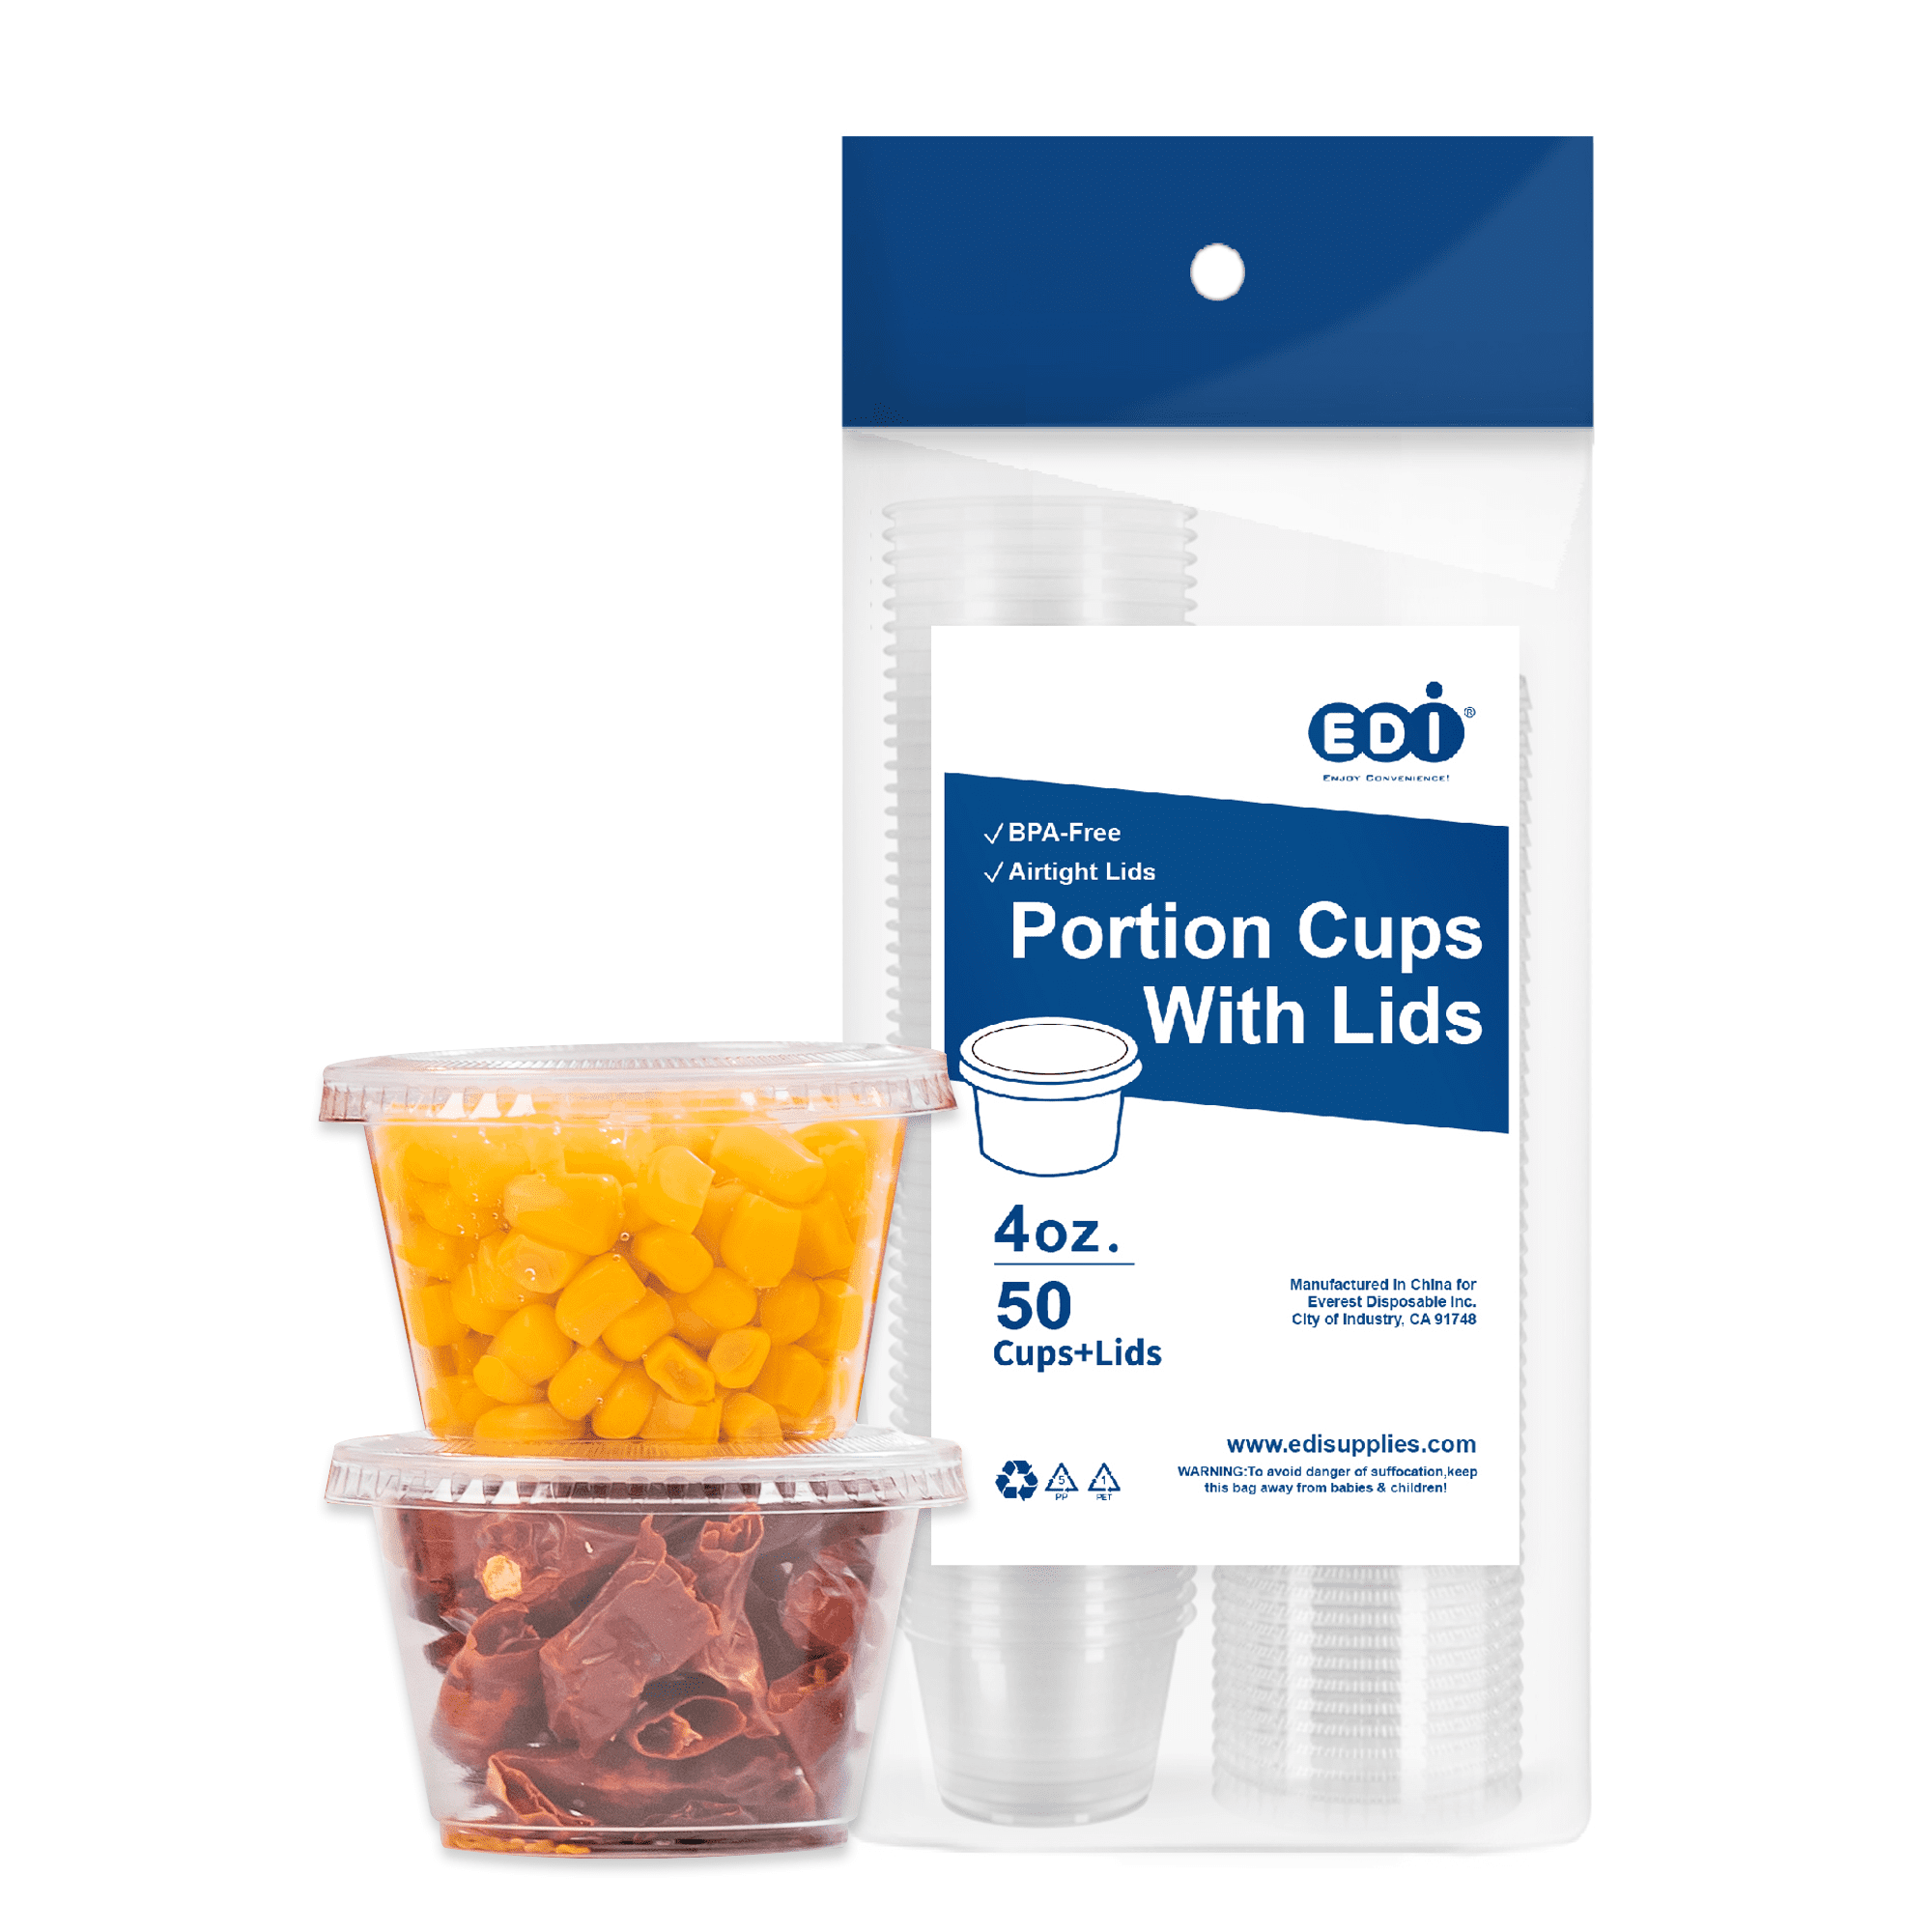 16-Ounce Plastic Party Cups in Blue (50 Pack) - Disposable Plastic Cup –  Stock Your Home